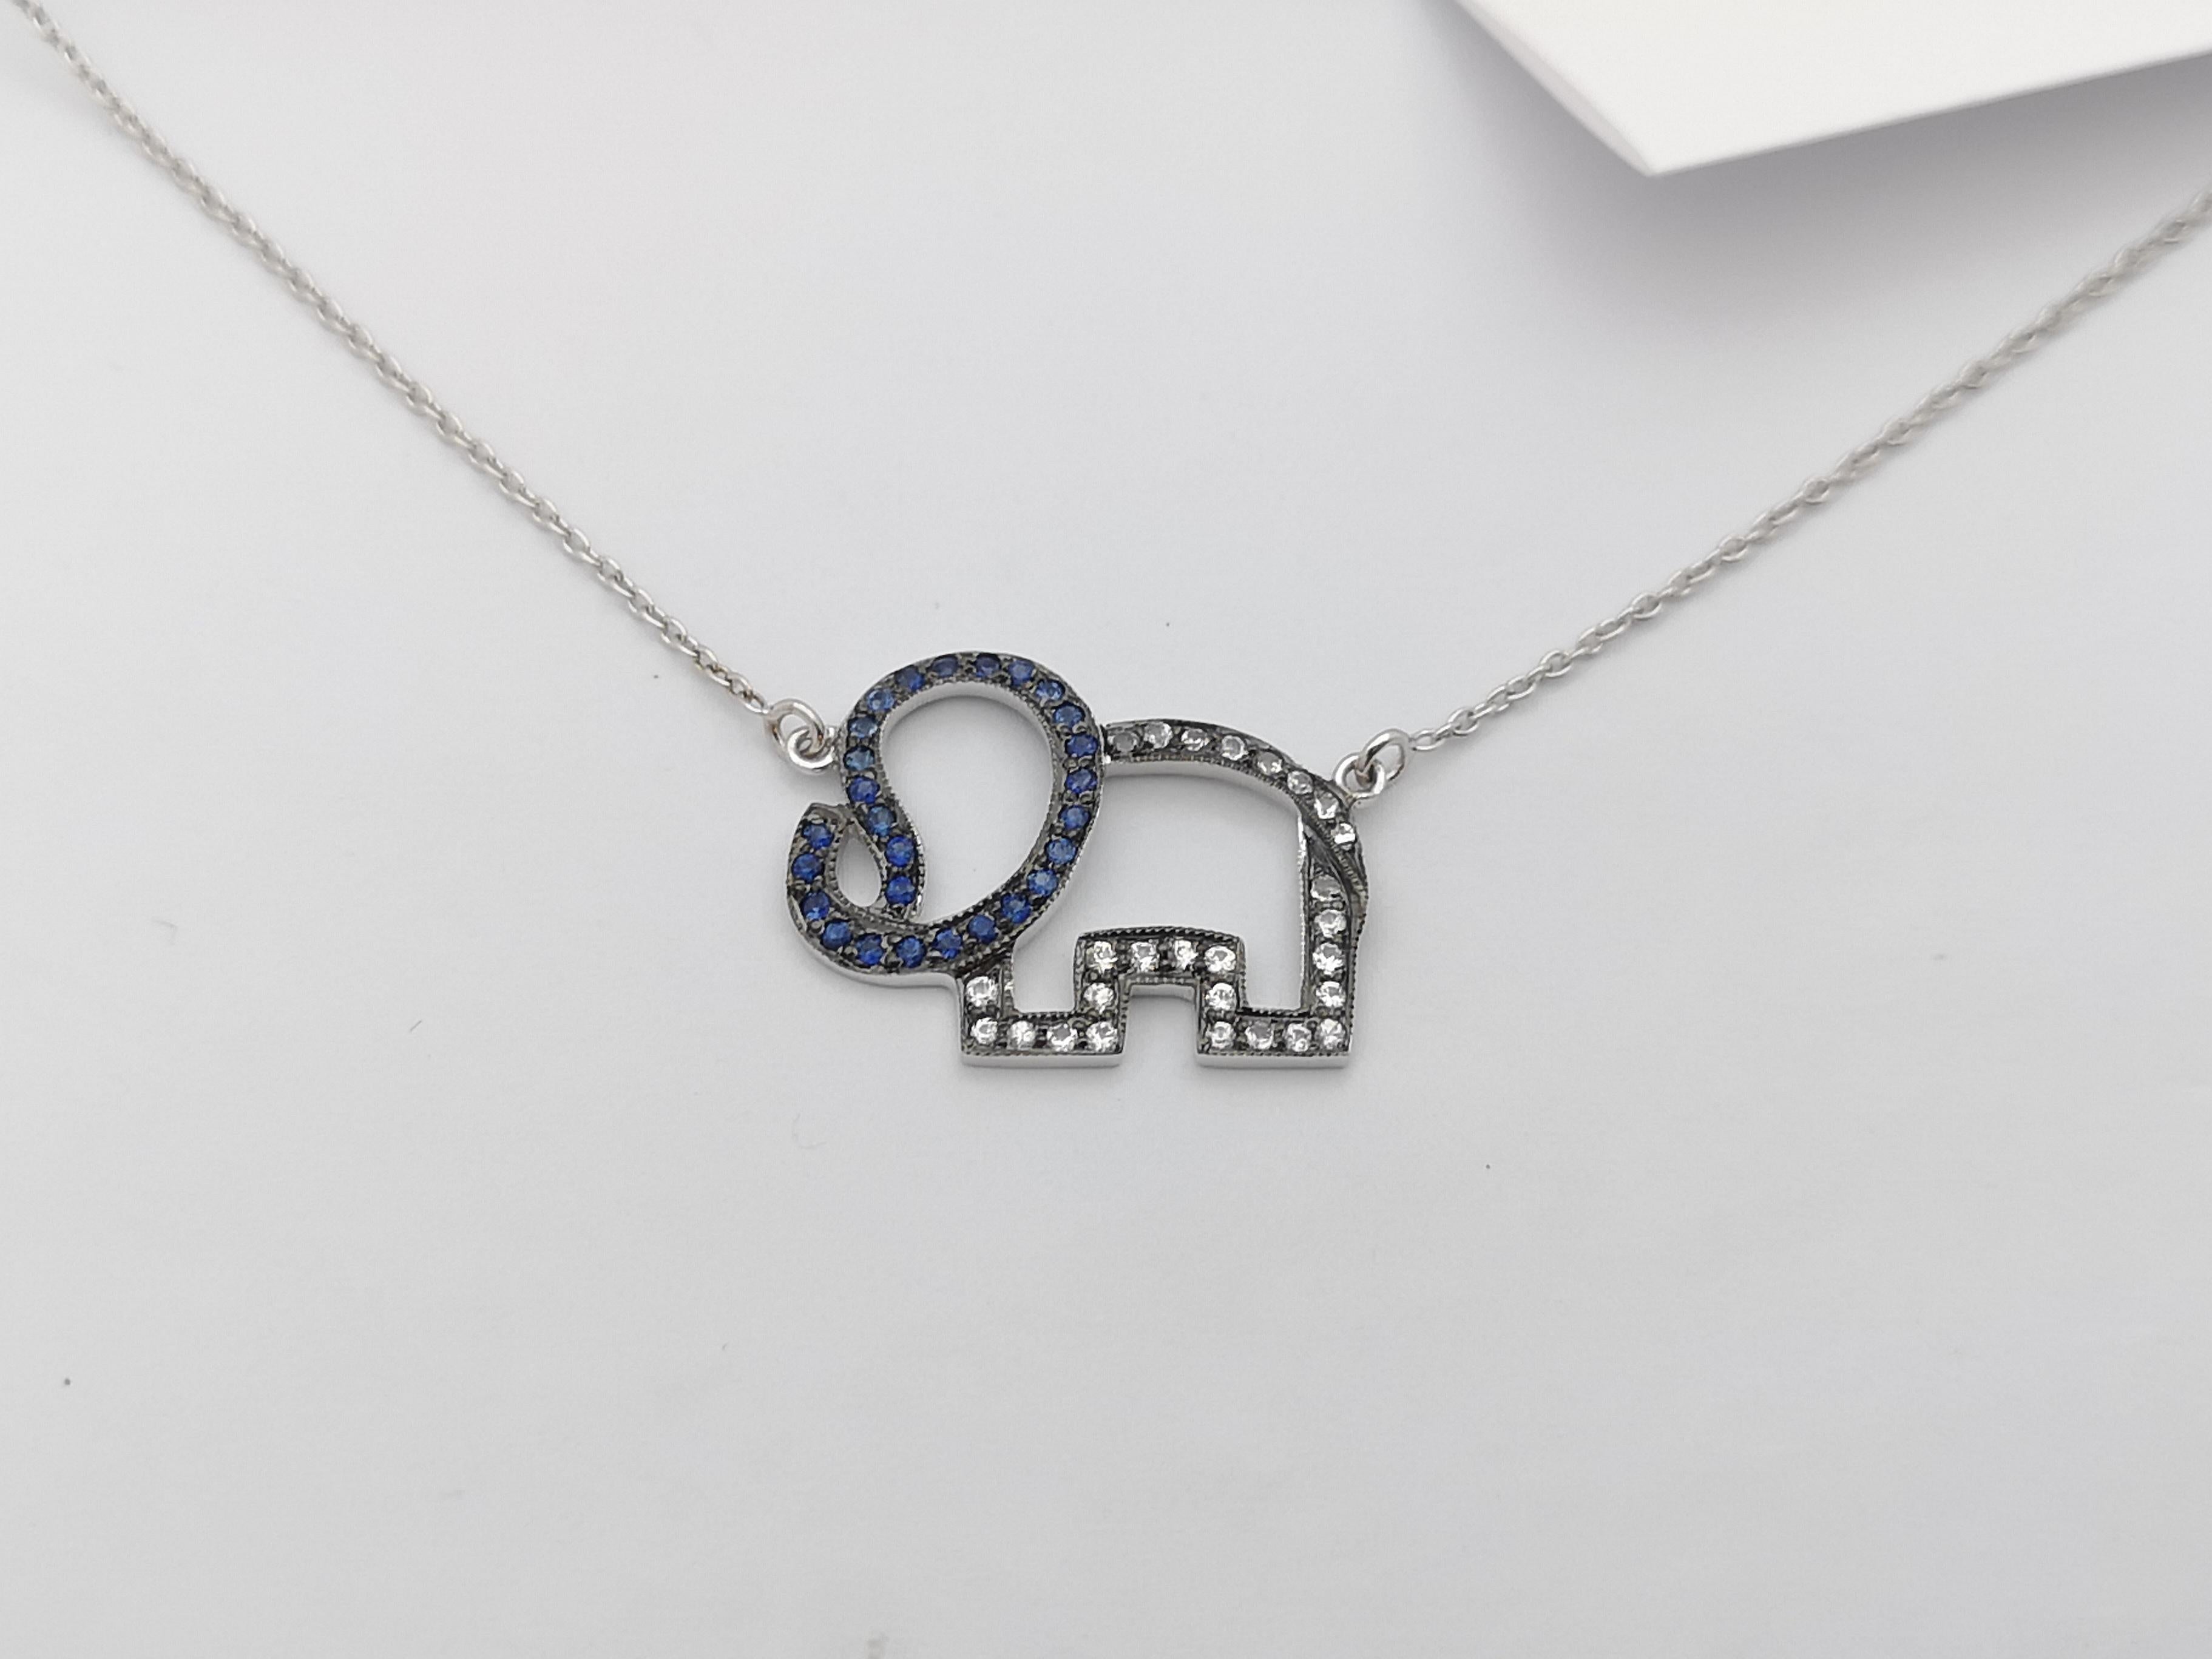 Blue Sapphire and White Sapphire Necklace set in Silver Settings

Width:  1.9 cm 
Length:  45.5 cm
Total Weight: 3.4 grams

*Please note that the silver setting is plated with rhodium to promote shine and help prevent oxidation.  However, with the